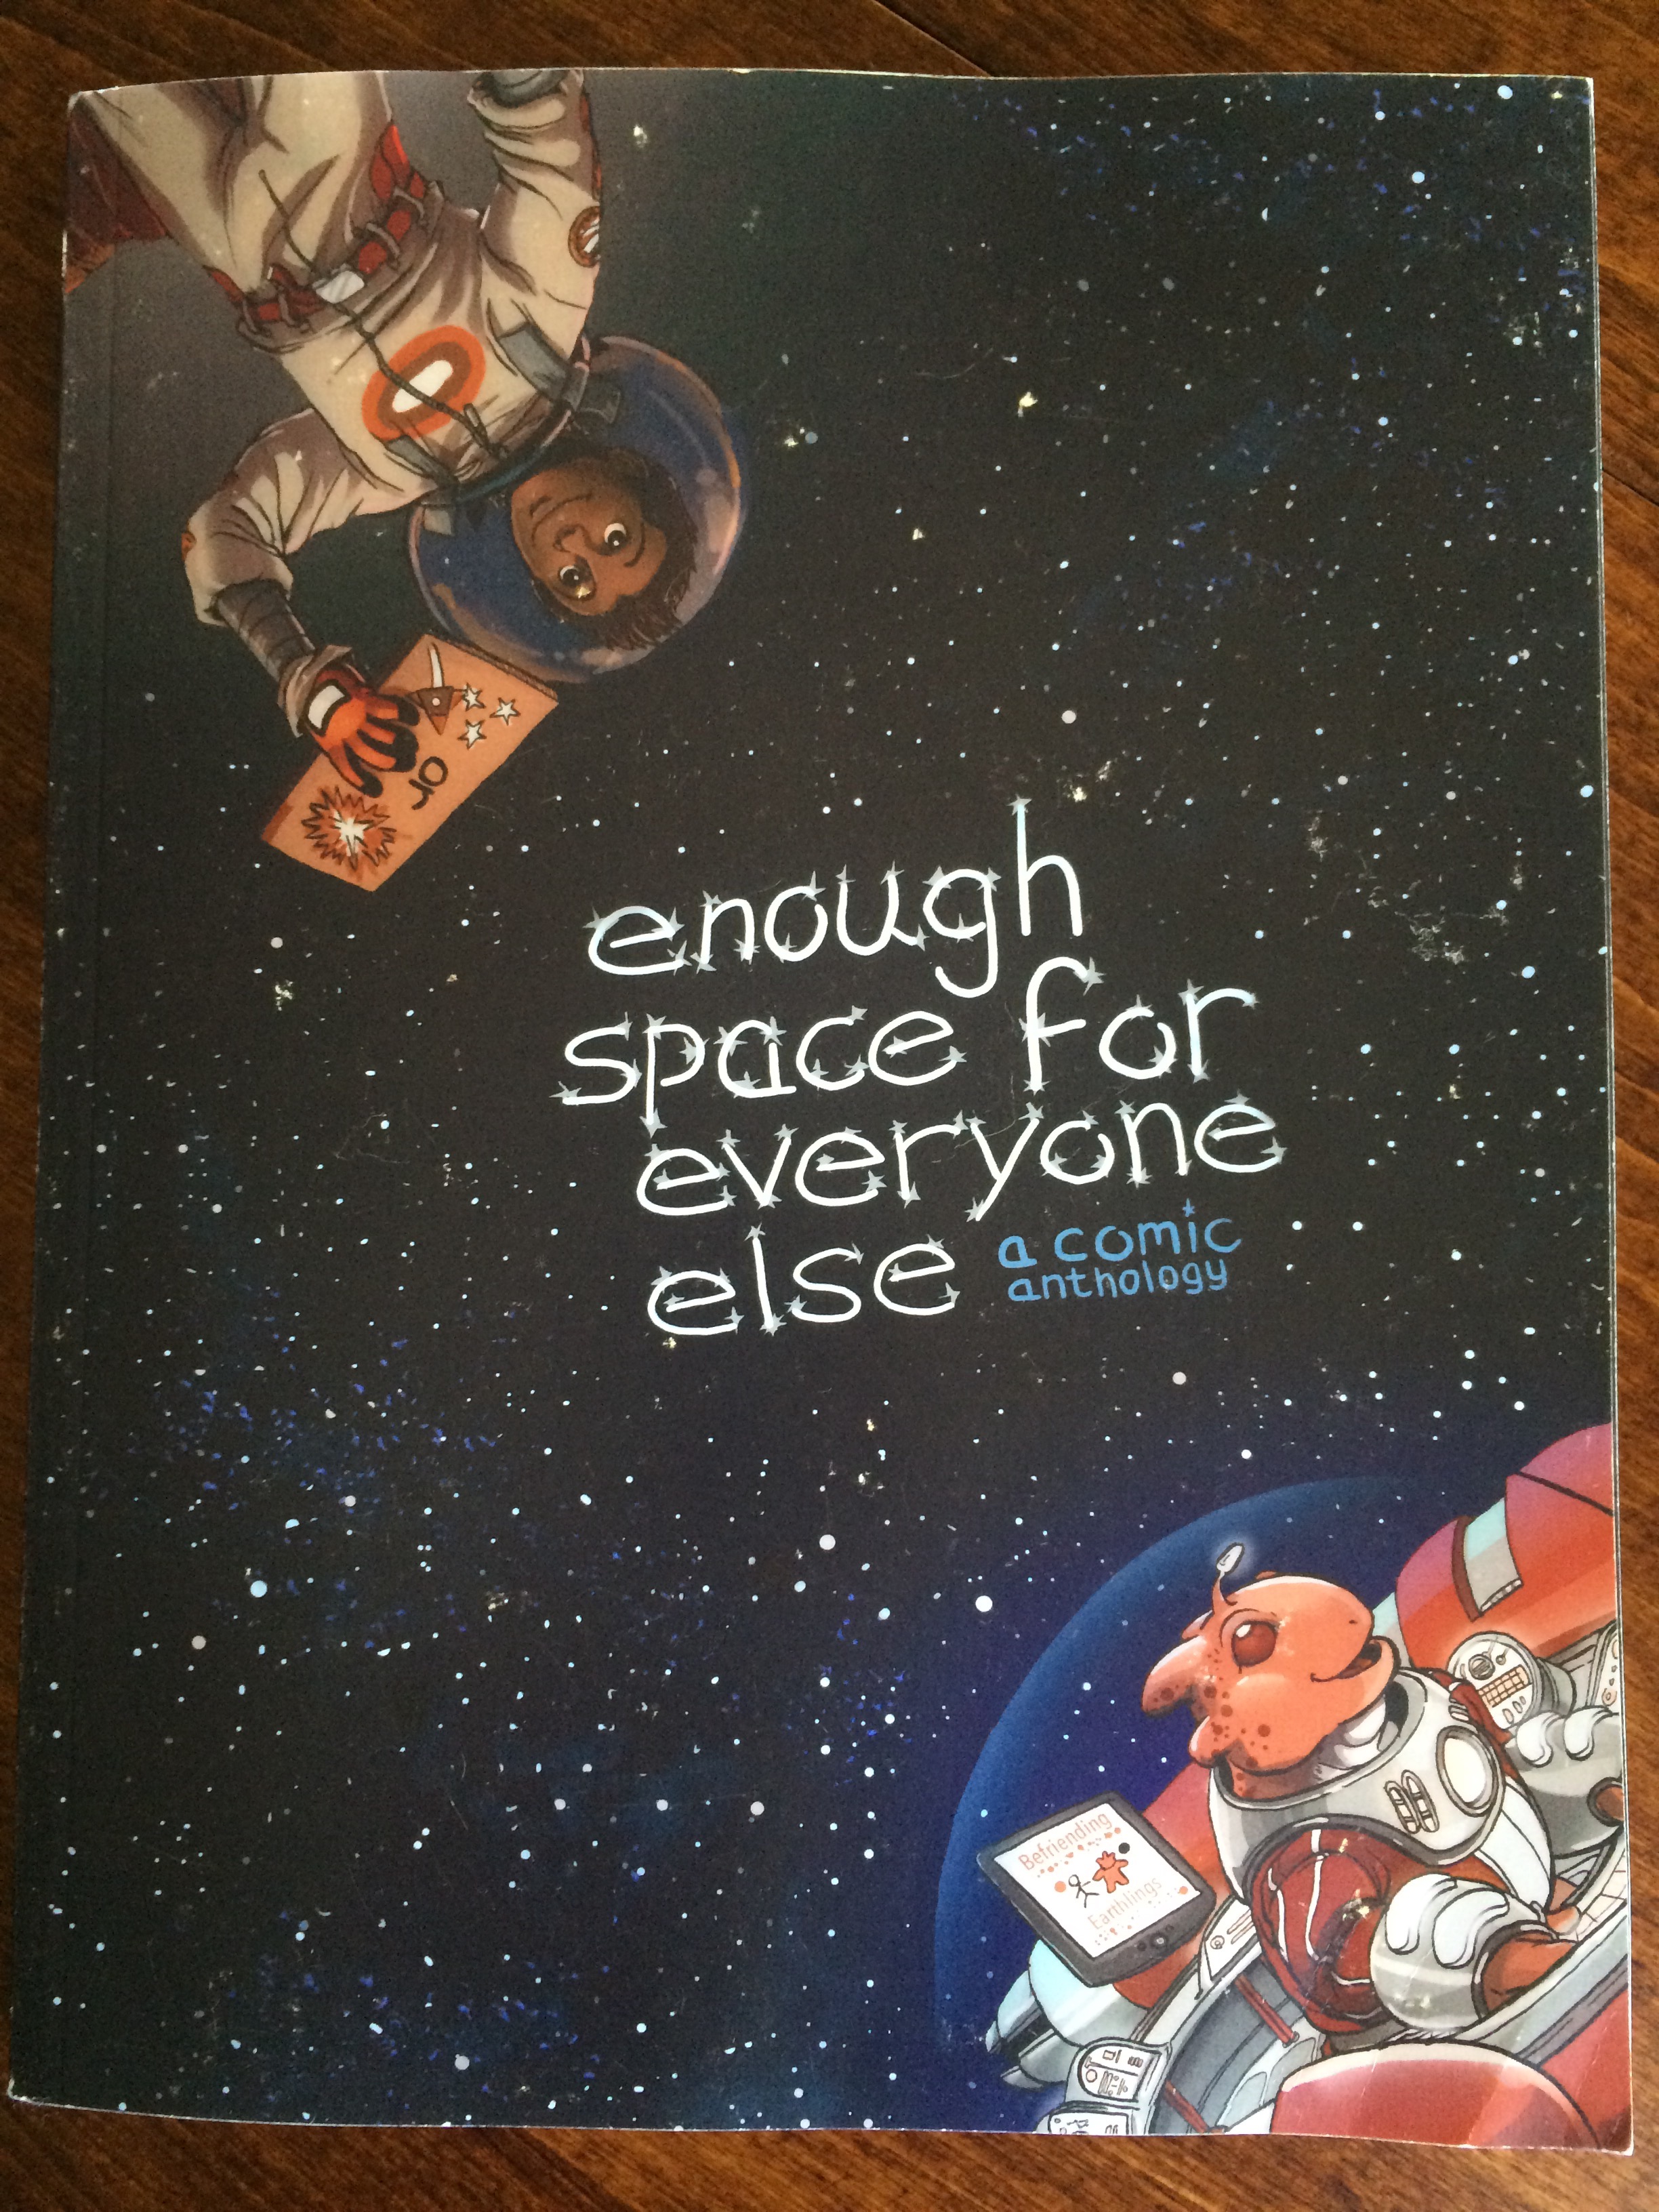 The cover of the science fiction anthology Enough Space for Everyone Else